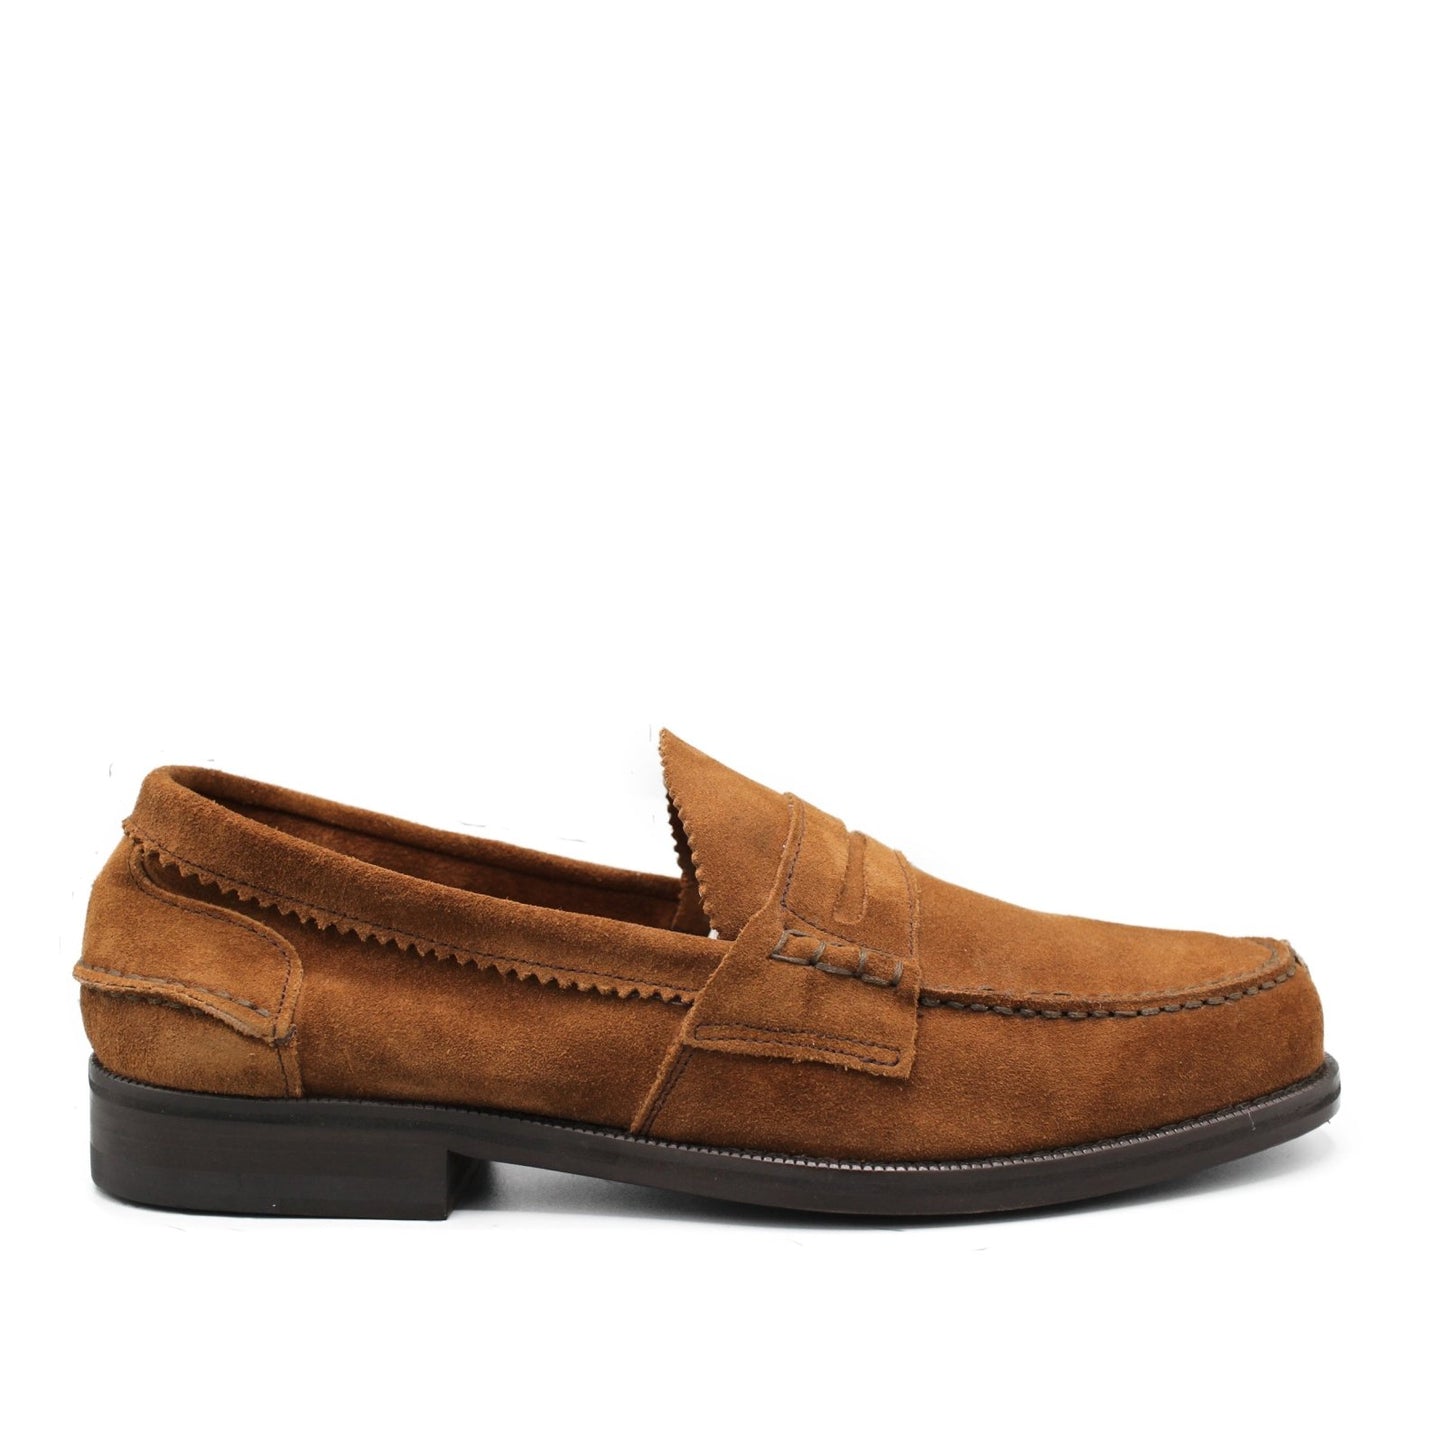 PENNY LOAFER TOBACCO SUEDE - Saxone of Scotland